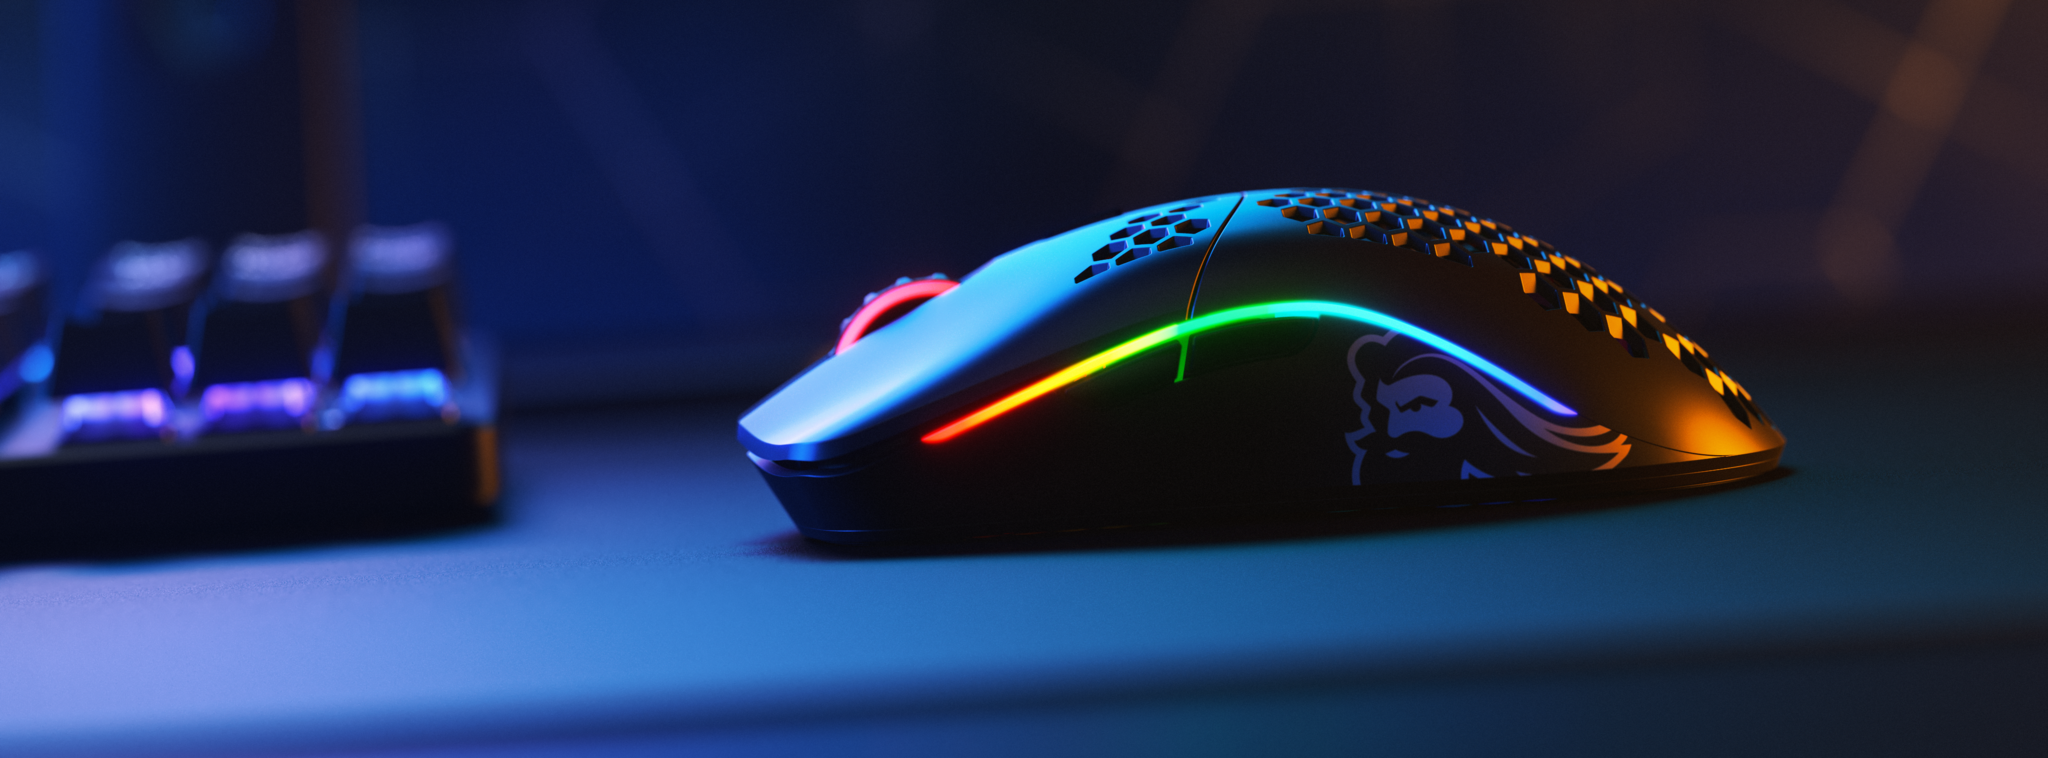 the black mouse with a rainbow led light on the side